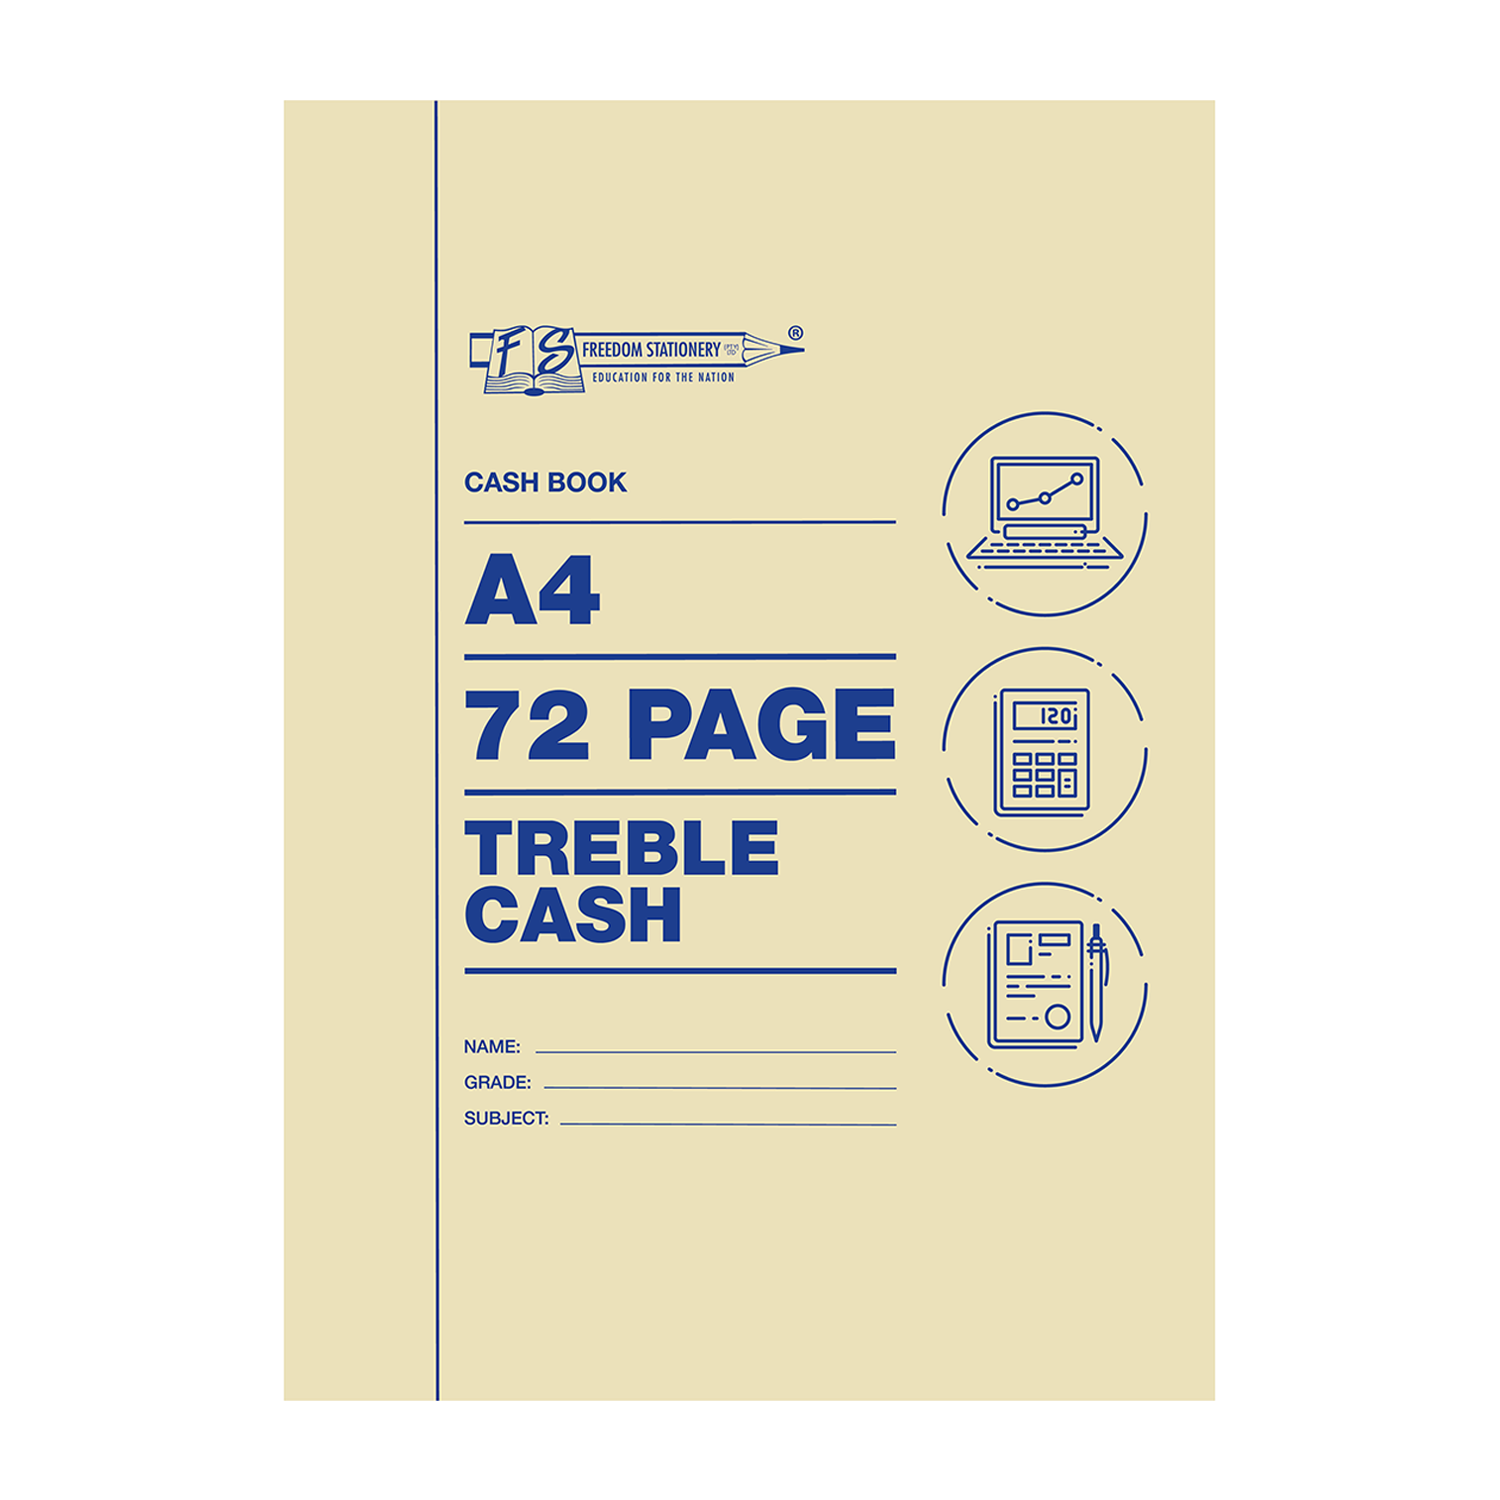 Freedom Stationery A4 Treble Cash 72 Page